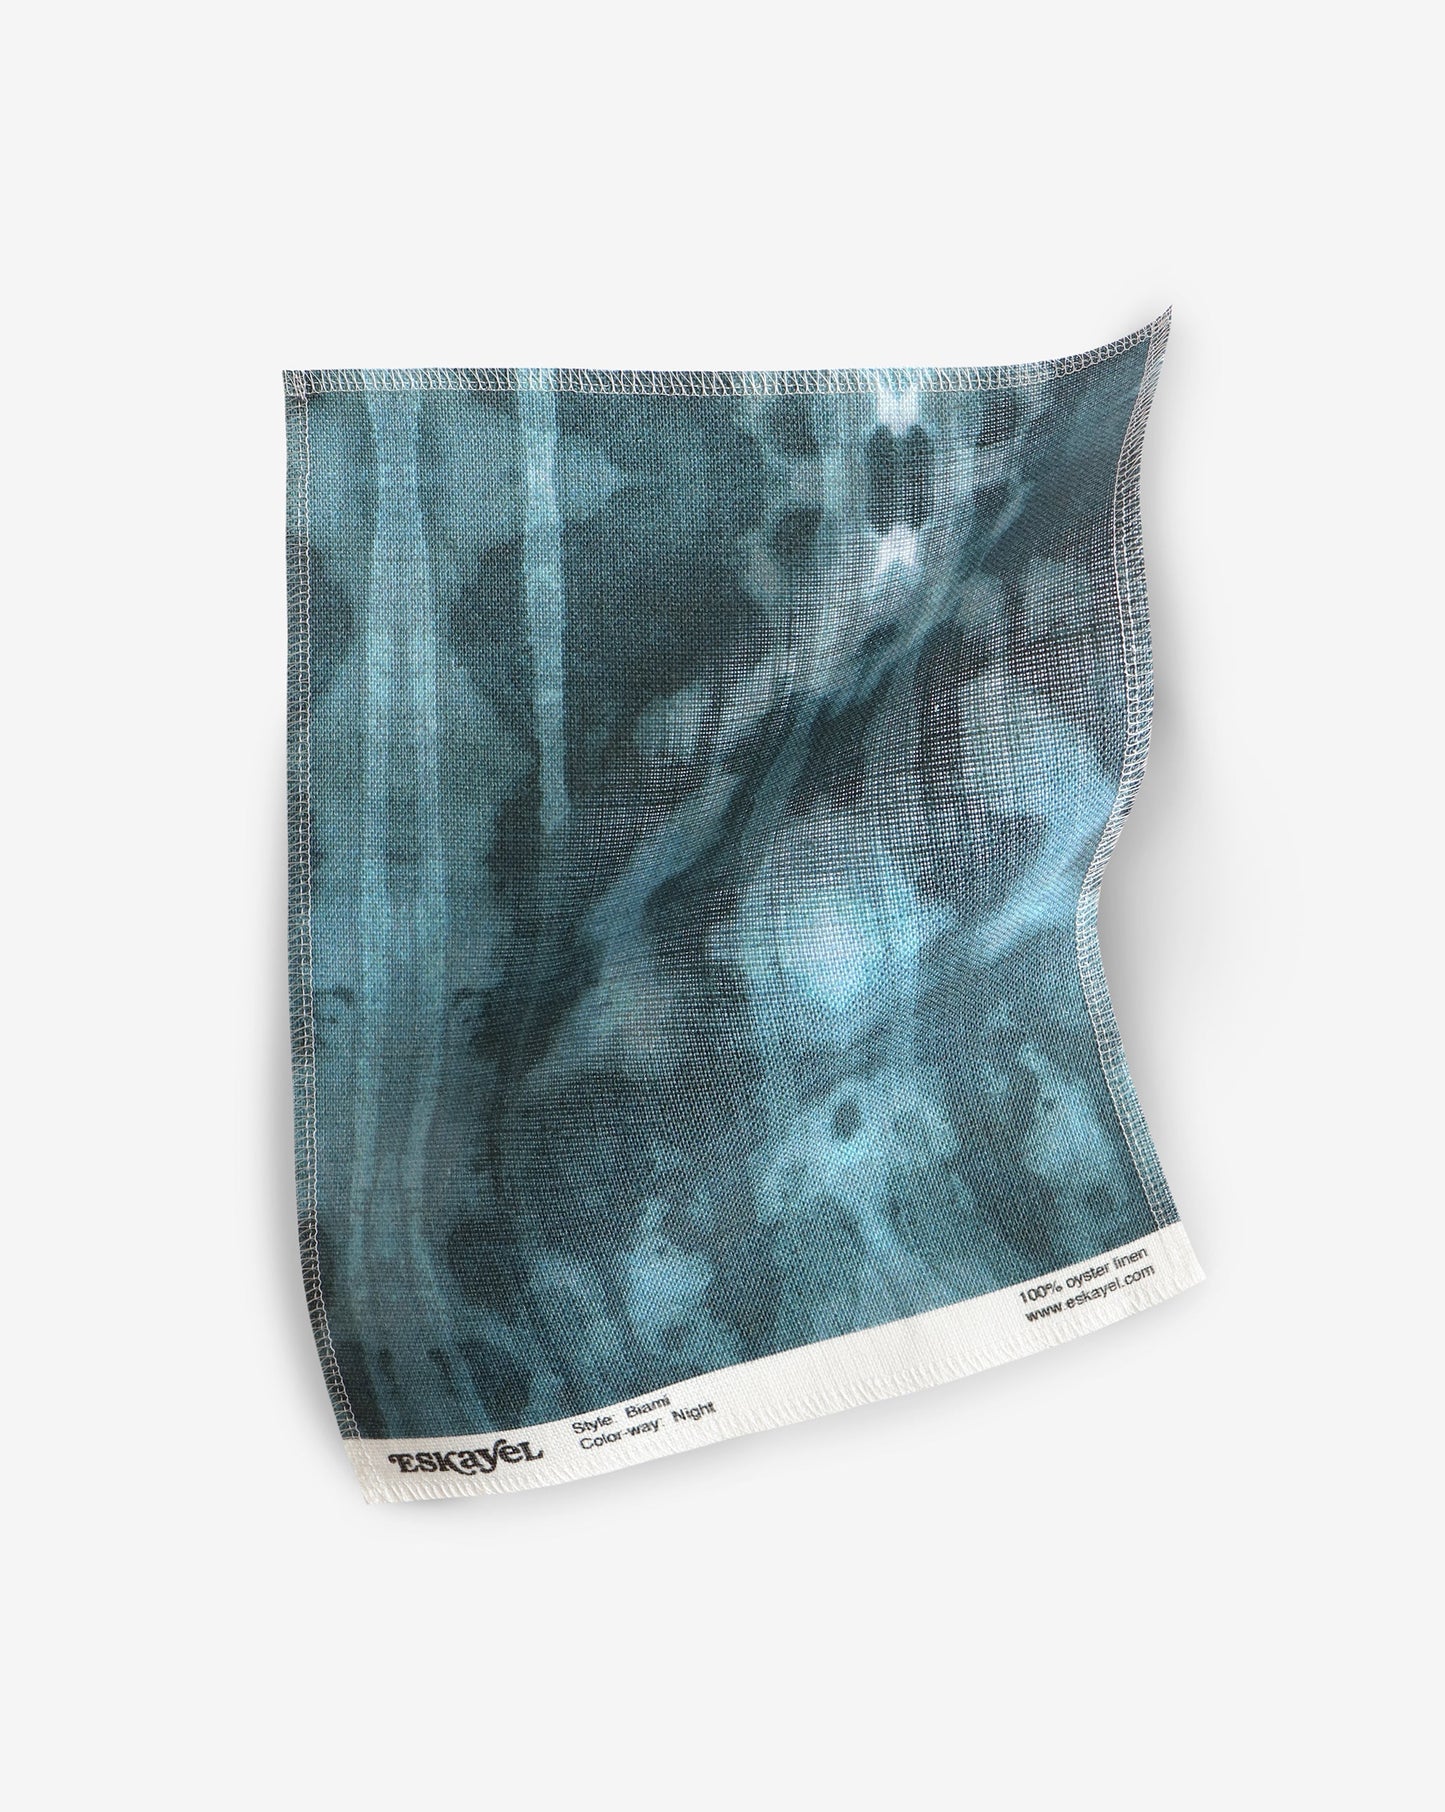 A blue and black tie dye pattern on a white background made with Biami Fabric Night